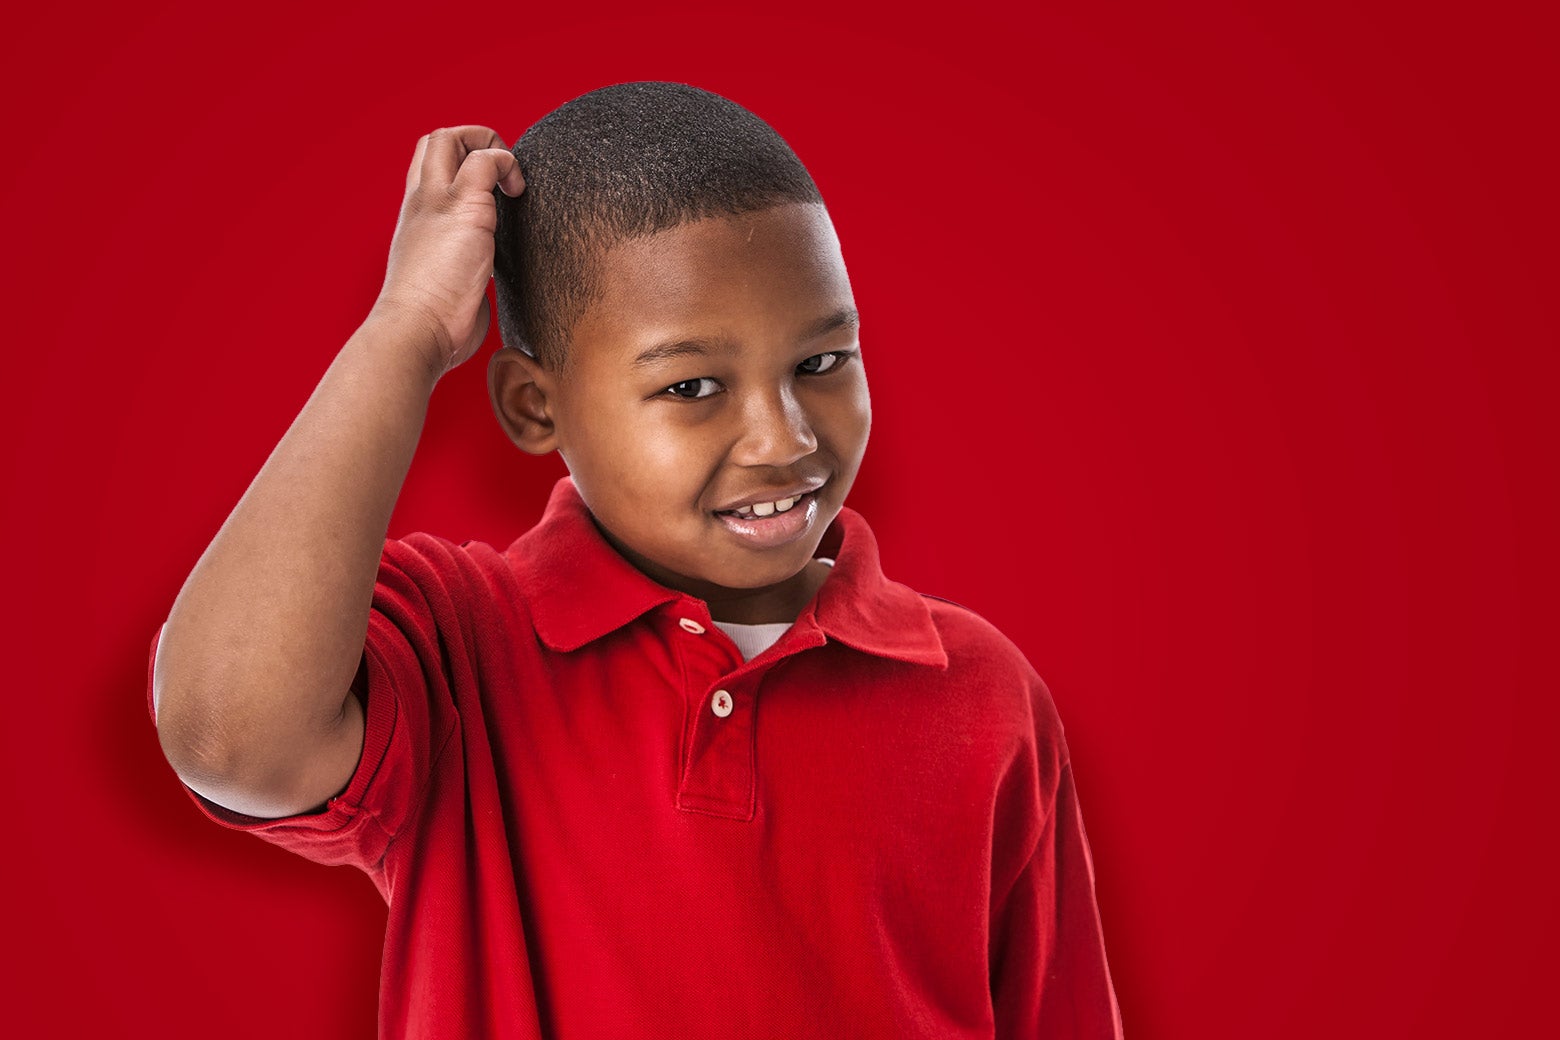 A little boy wearing a red polo shirt scratches his head and looks bewildered.